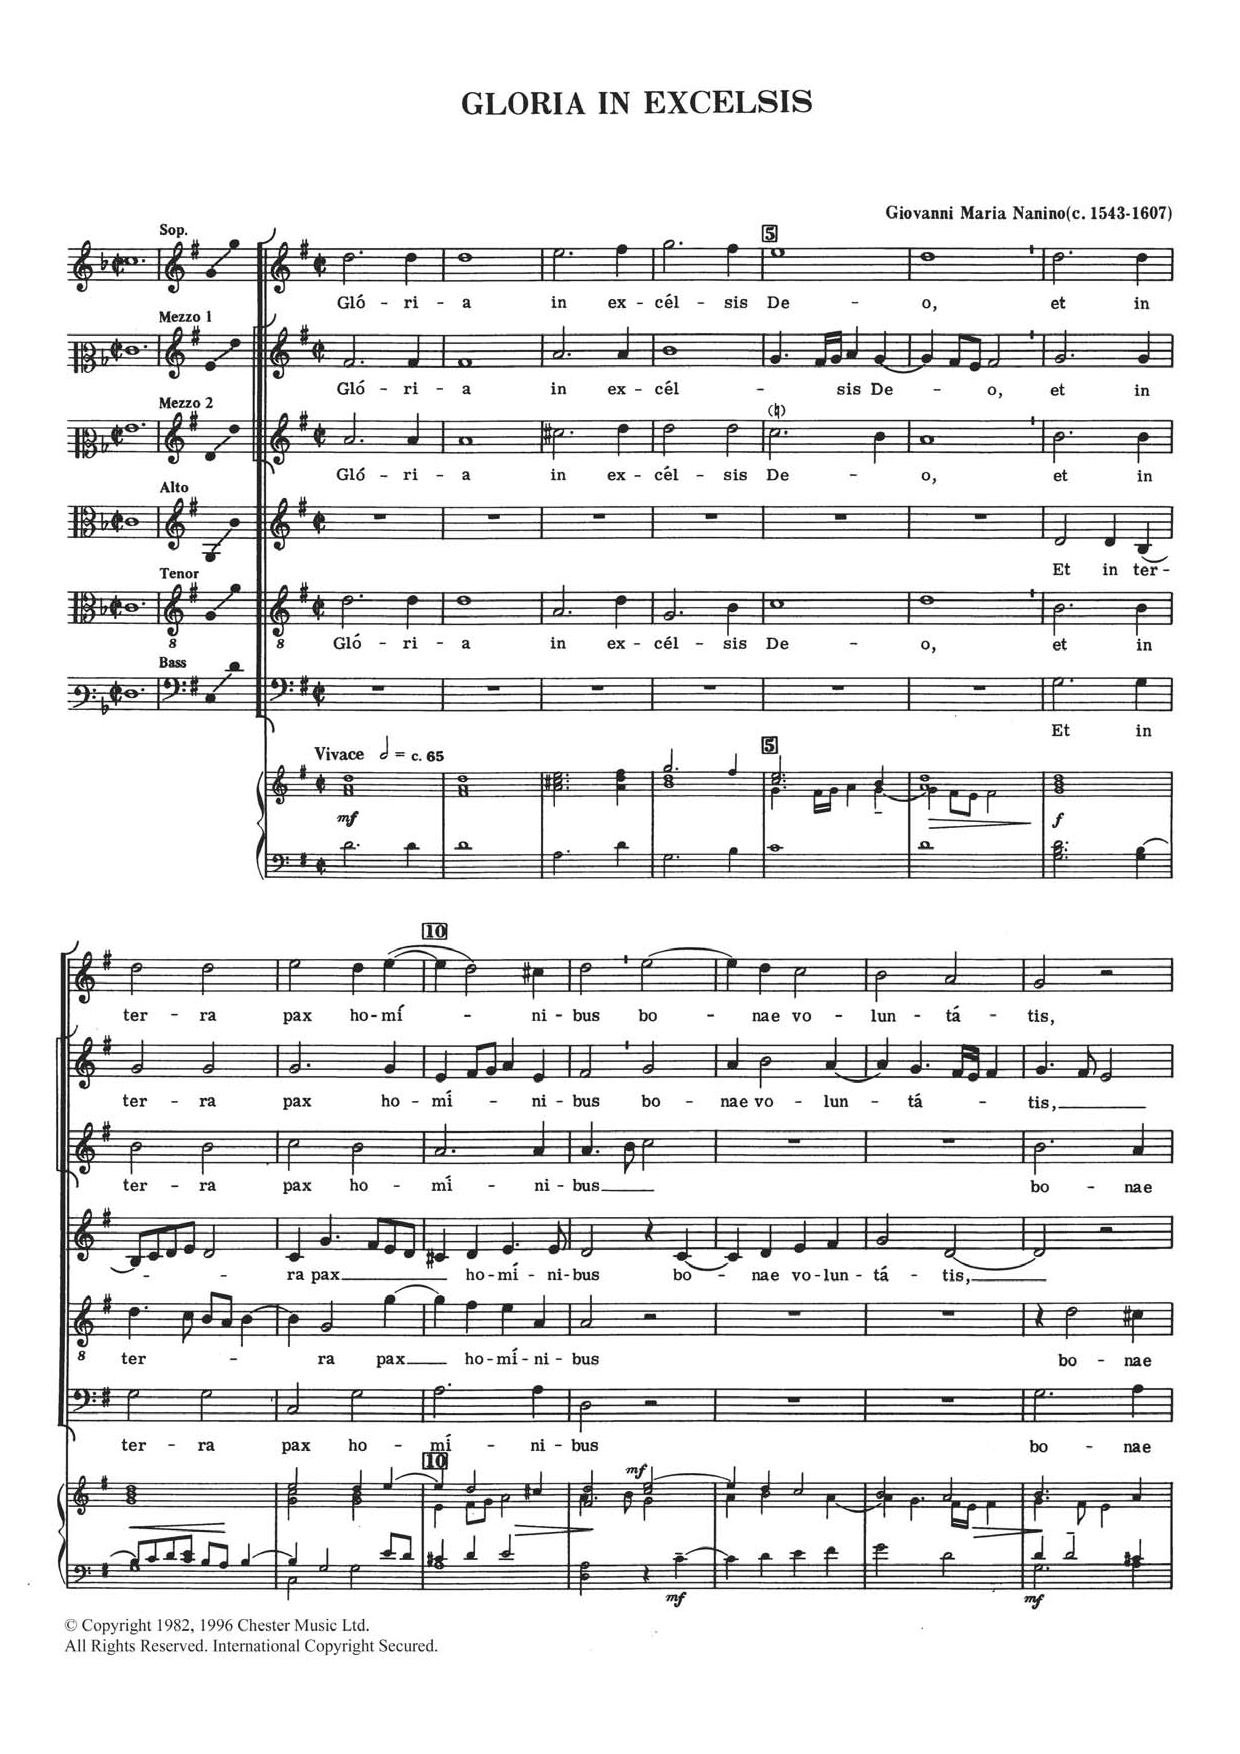 Download Giovanni Maria Nanino Gloria In Excelsis Sheet Music